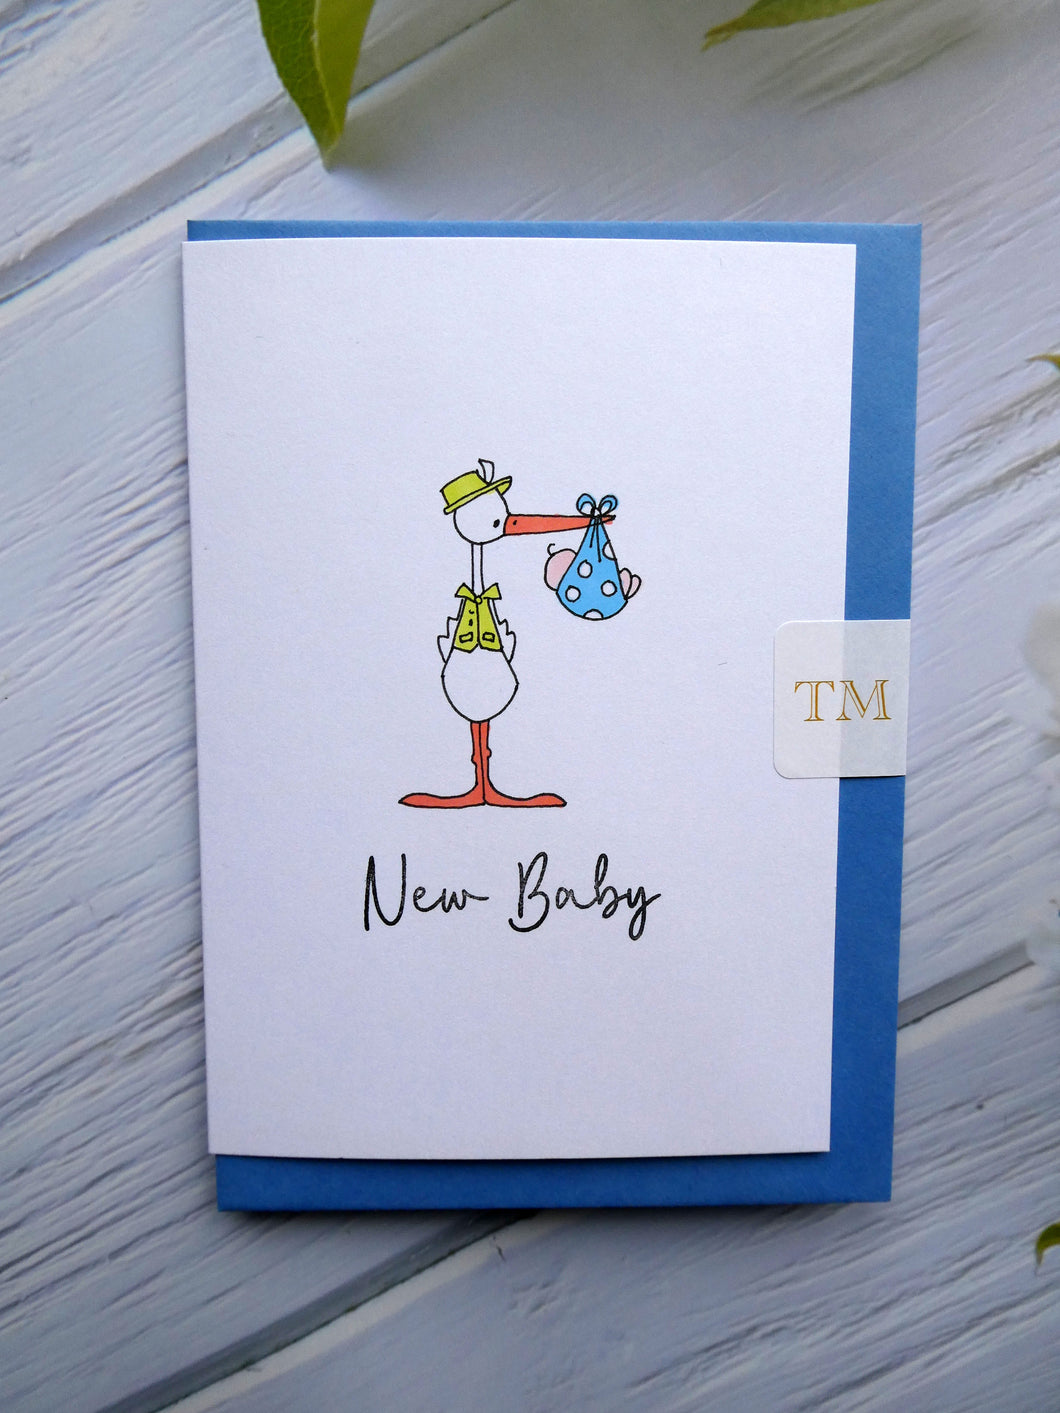 Hand drawn New Baby Greetings Card.